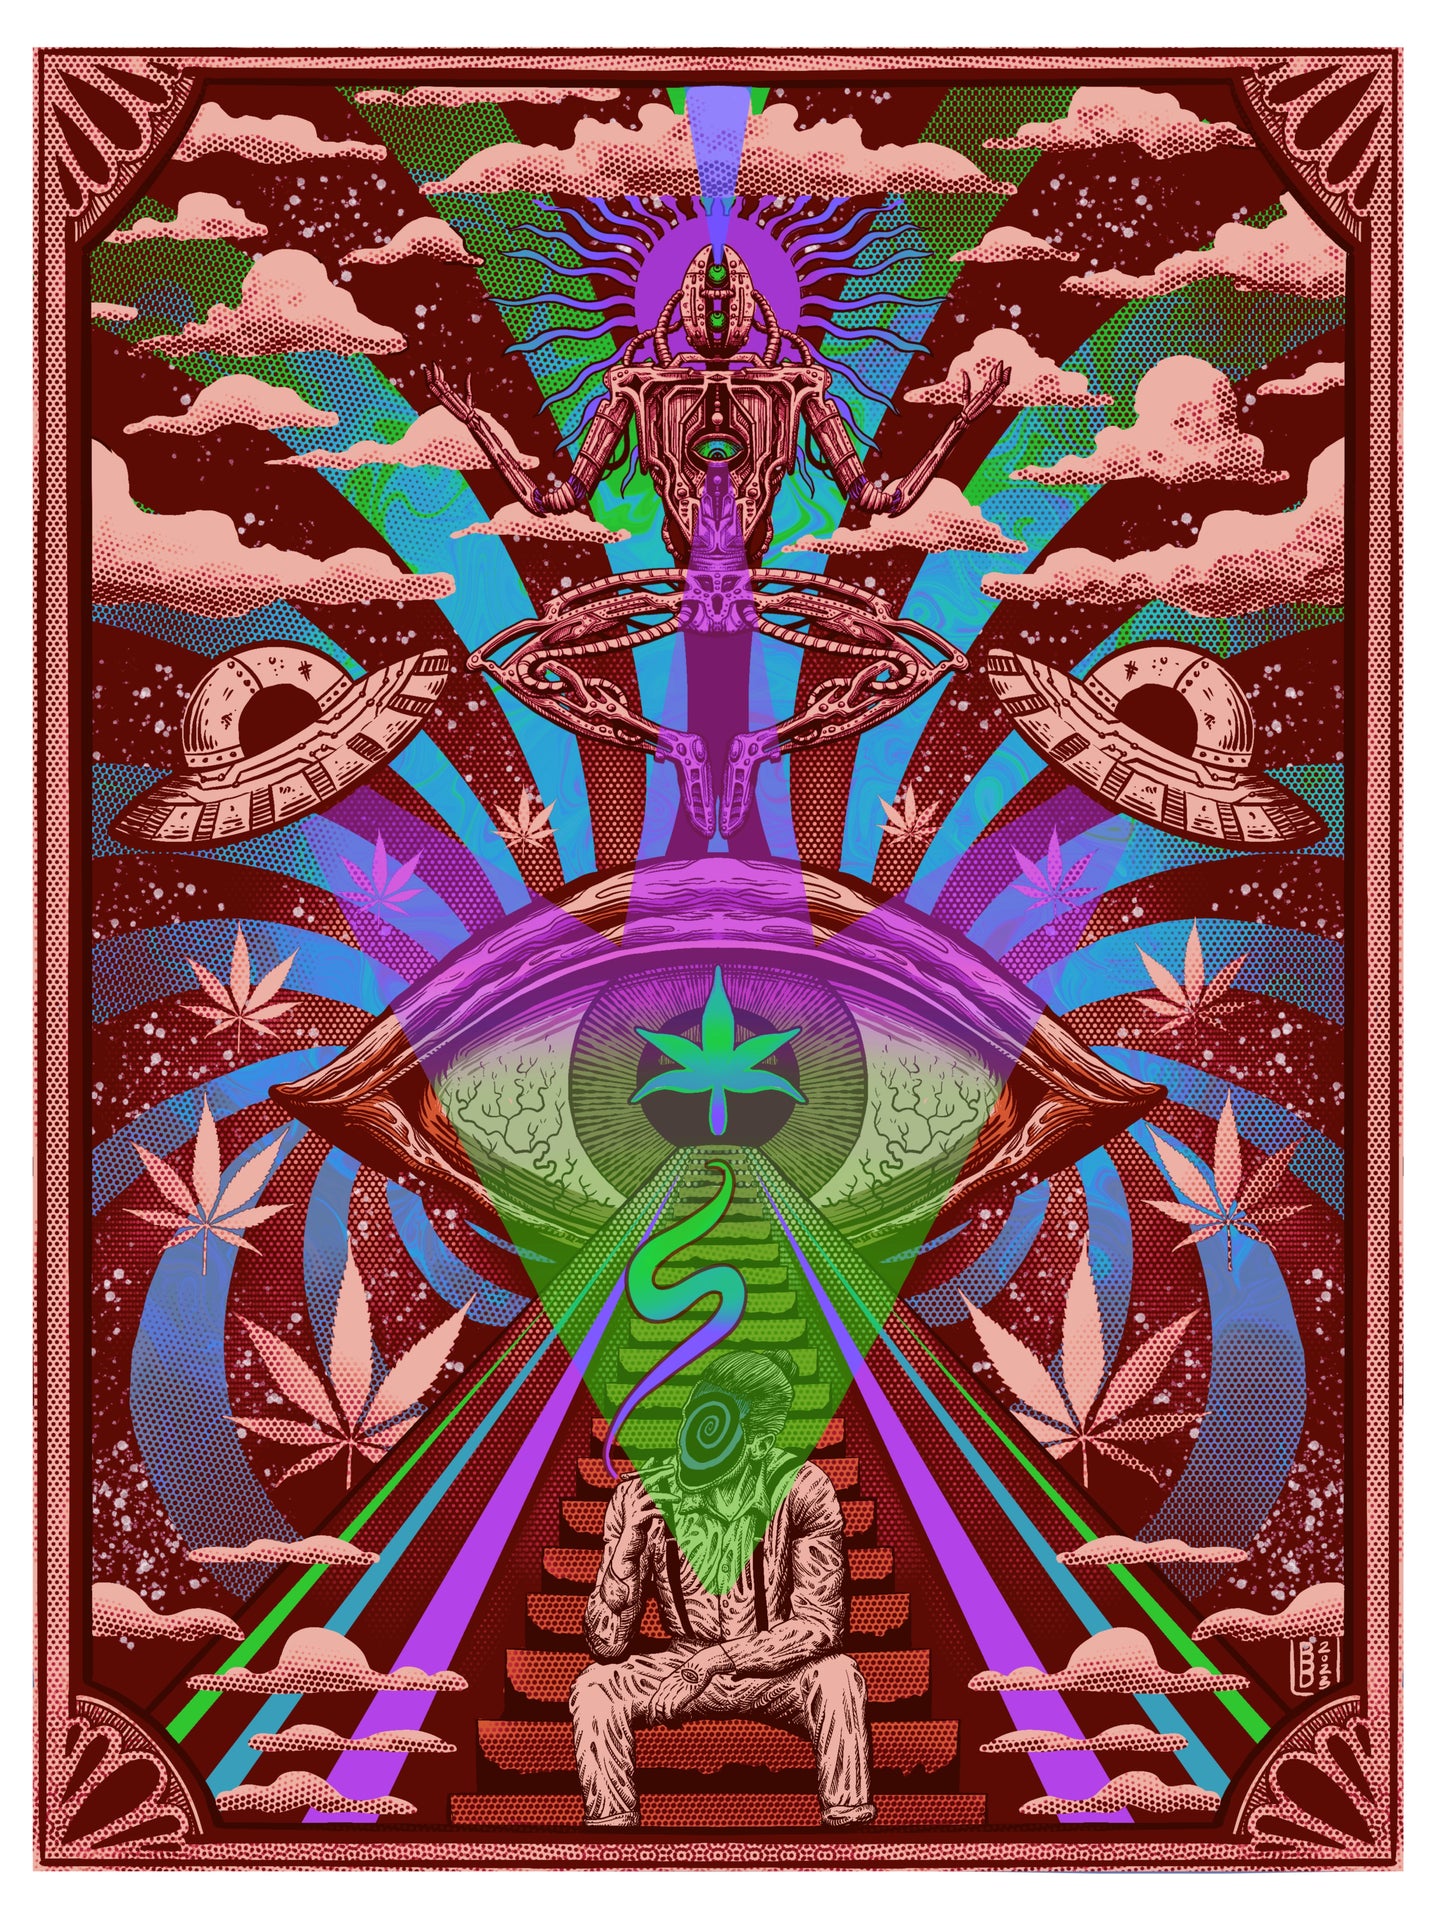 “THE CELESTIAL TOKE” (Rare Edition) 12in x 16in Limited Edition Print